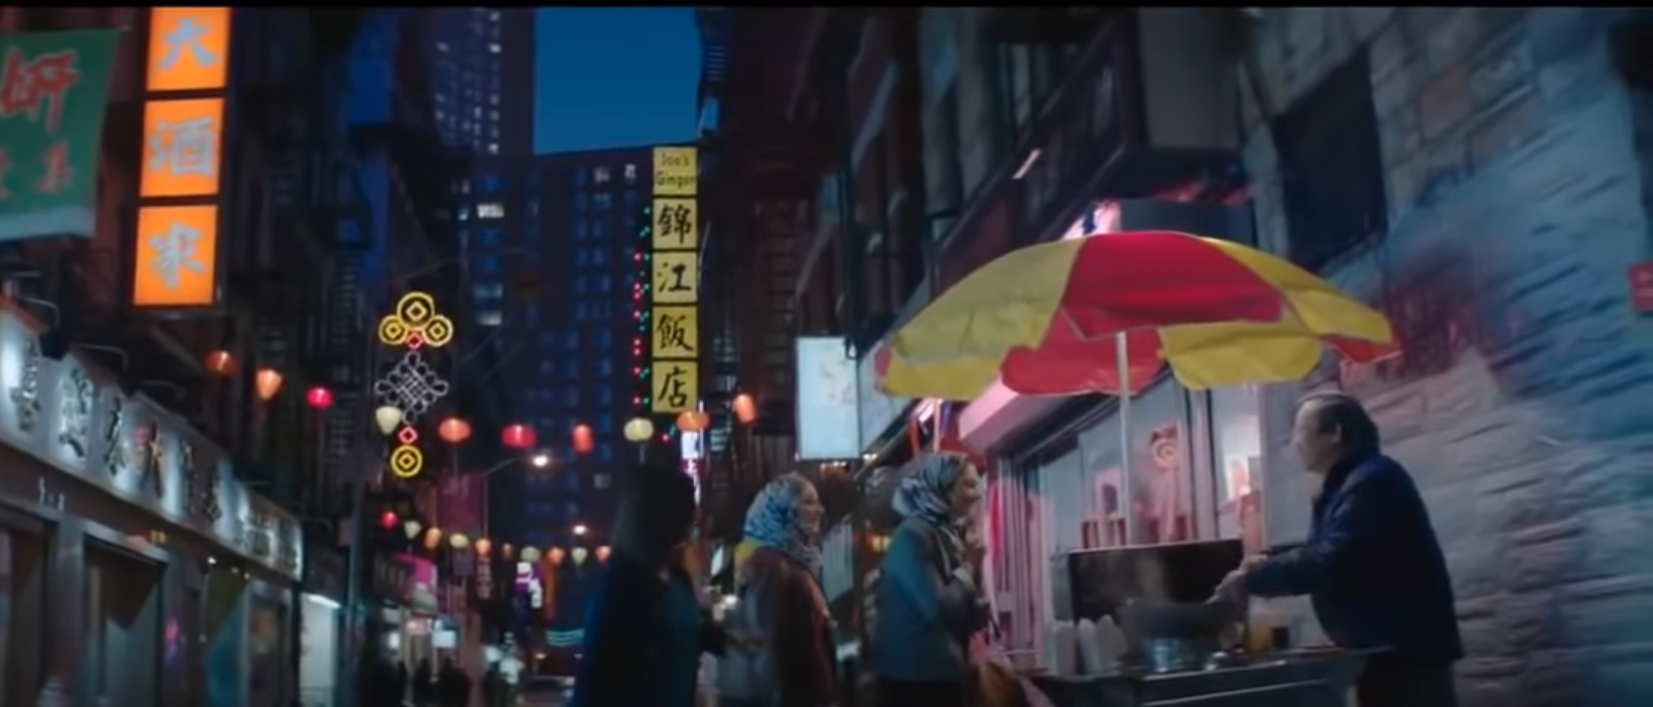 In 2014, Coca-Cola was accused of courting controversy by releasing a Super Bowl commercial in which "America the Beautiful” was sung in several languages, including Hindi. The commercial included a vignette in which hijab-wearing Muslim women bought Chinese food. [YouTube/Screenshot/VassarDriveMusic]